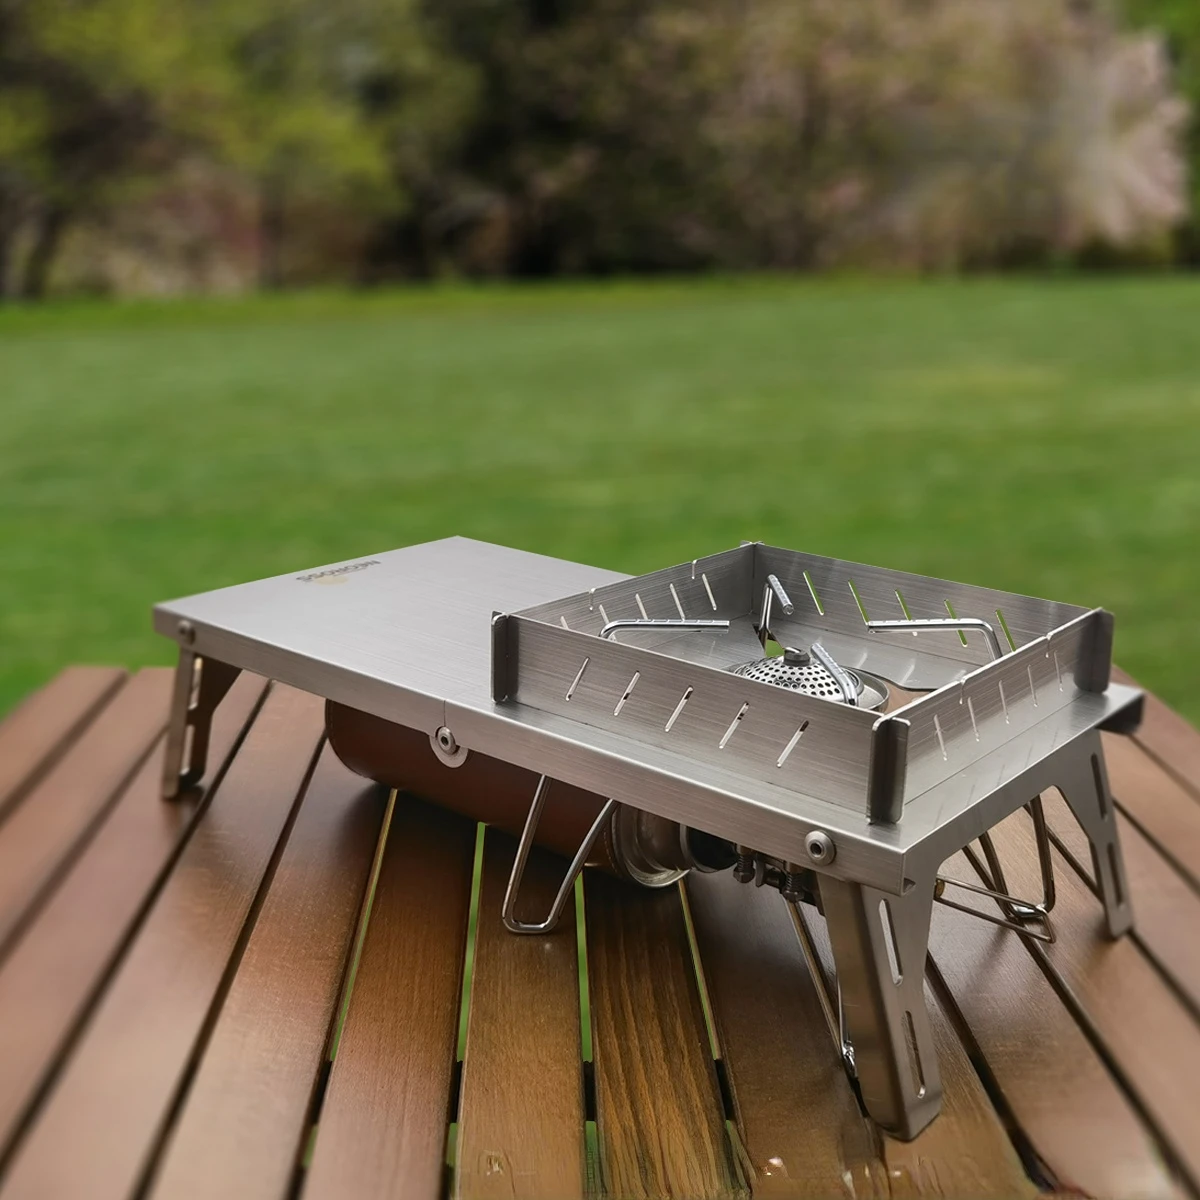 Outdoor Insulated Stainless Steel Folding Table for Camping Gear for SOTO Spider Stove Picnic Party Accessories for CBJCB New